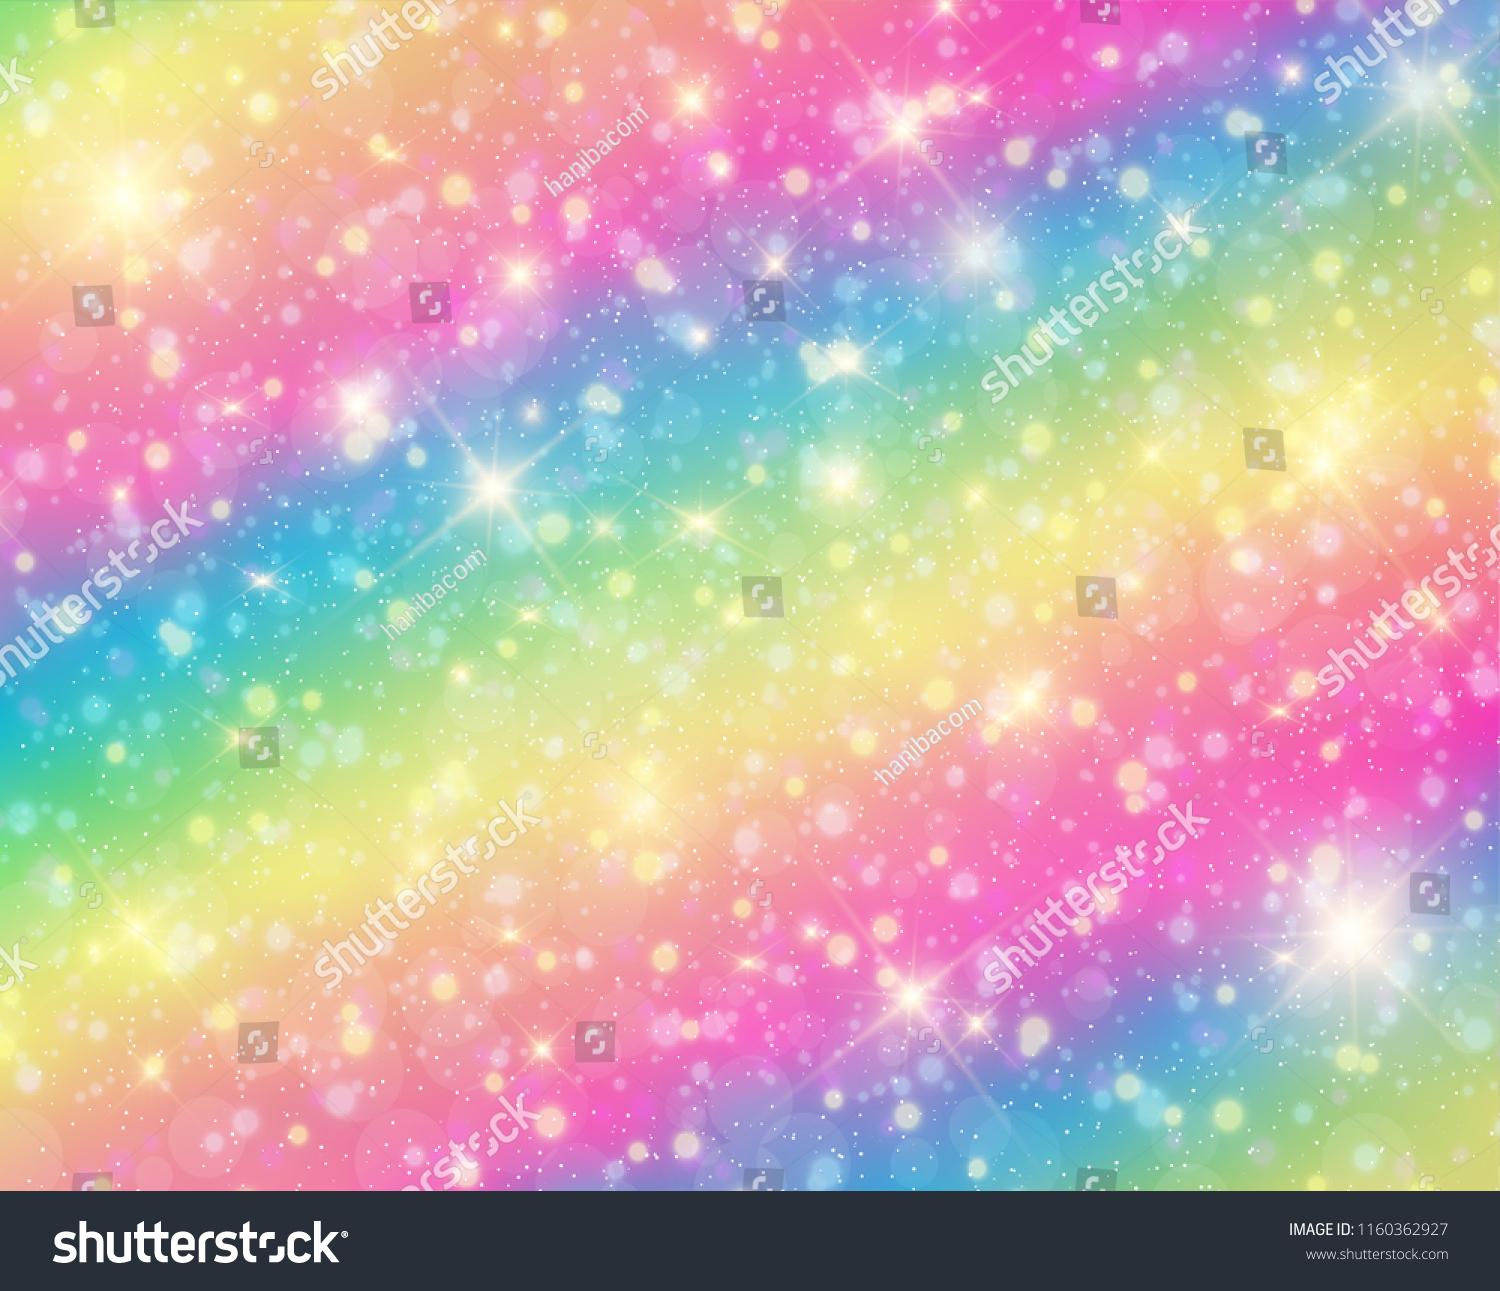 Vector Illustration Galaxy Fantasy Background Pastel Stock Vector Royalty Free 1160362927 Galaxy sky square border isolated on white background with place for text. https www shutterstock com image vector vector illustration galaxy fantasy background pastel 1160362927